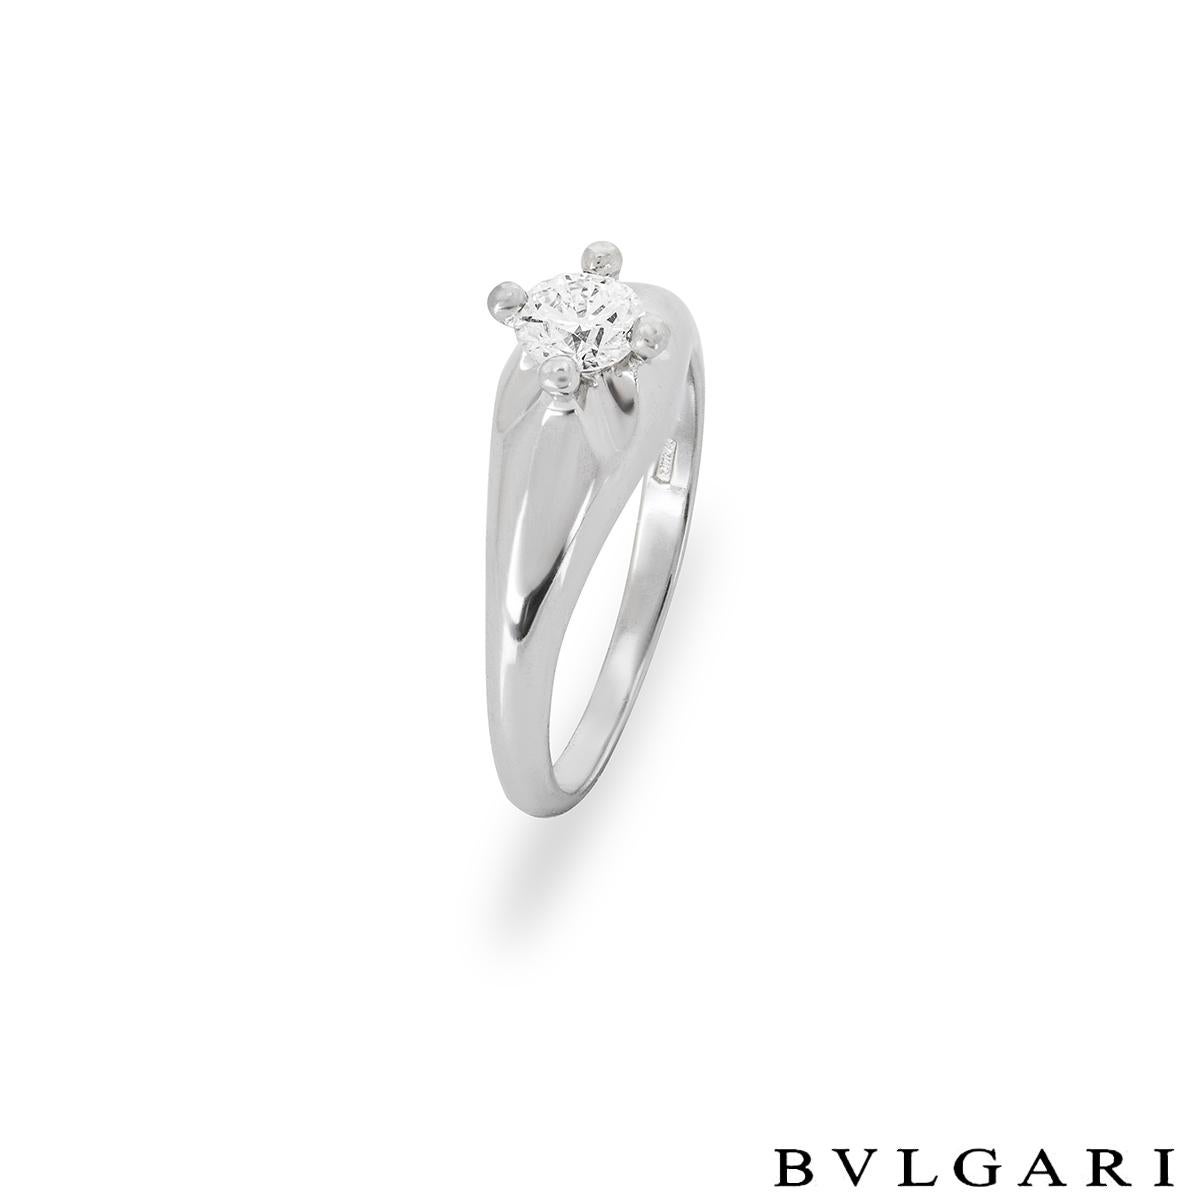 A stunning platinum diamond ring by Bvlgari from the Corona collection. The ring is set to the centre in a raised four claw mount with a round brilliant cut diamond weighing 0.33ct, D colour and VVS2 clarity. The tapered 6mm ring is currently a UK